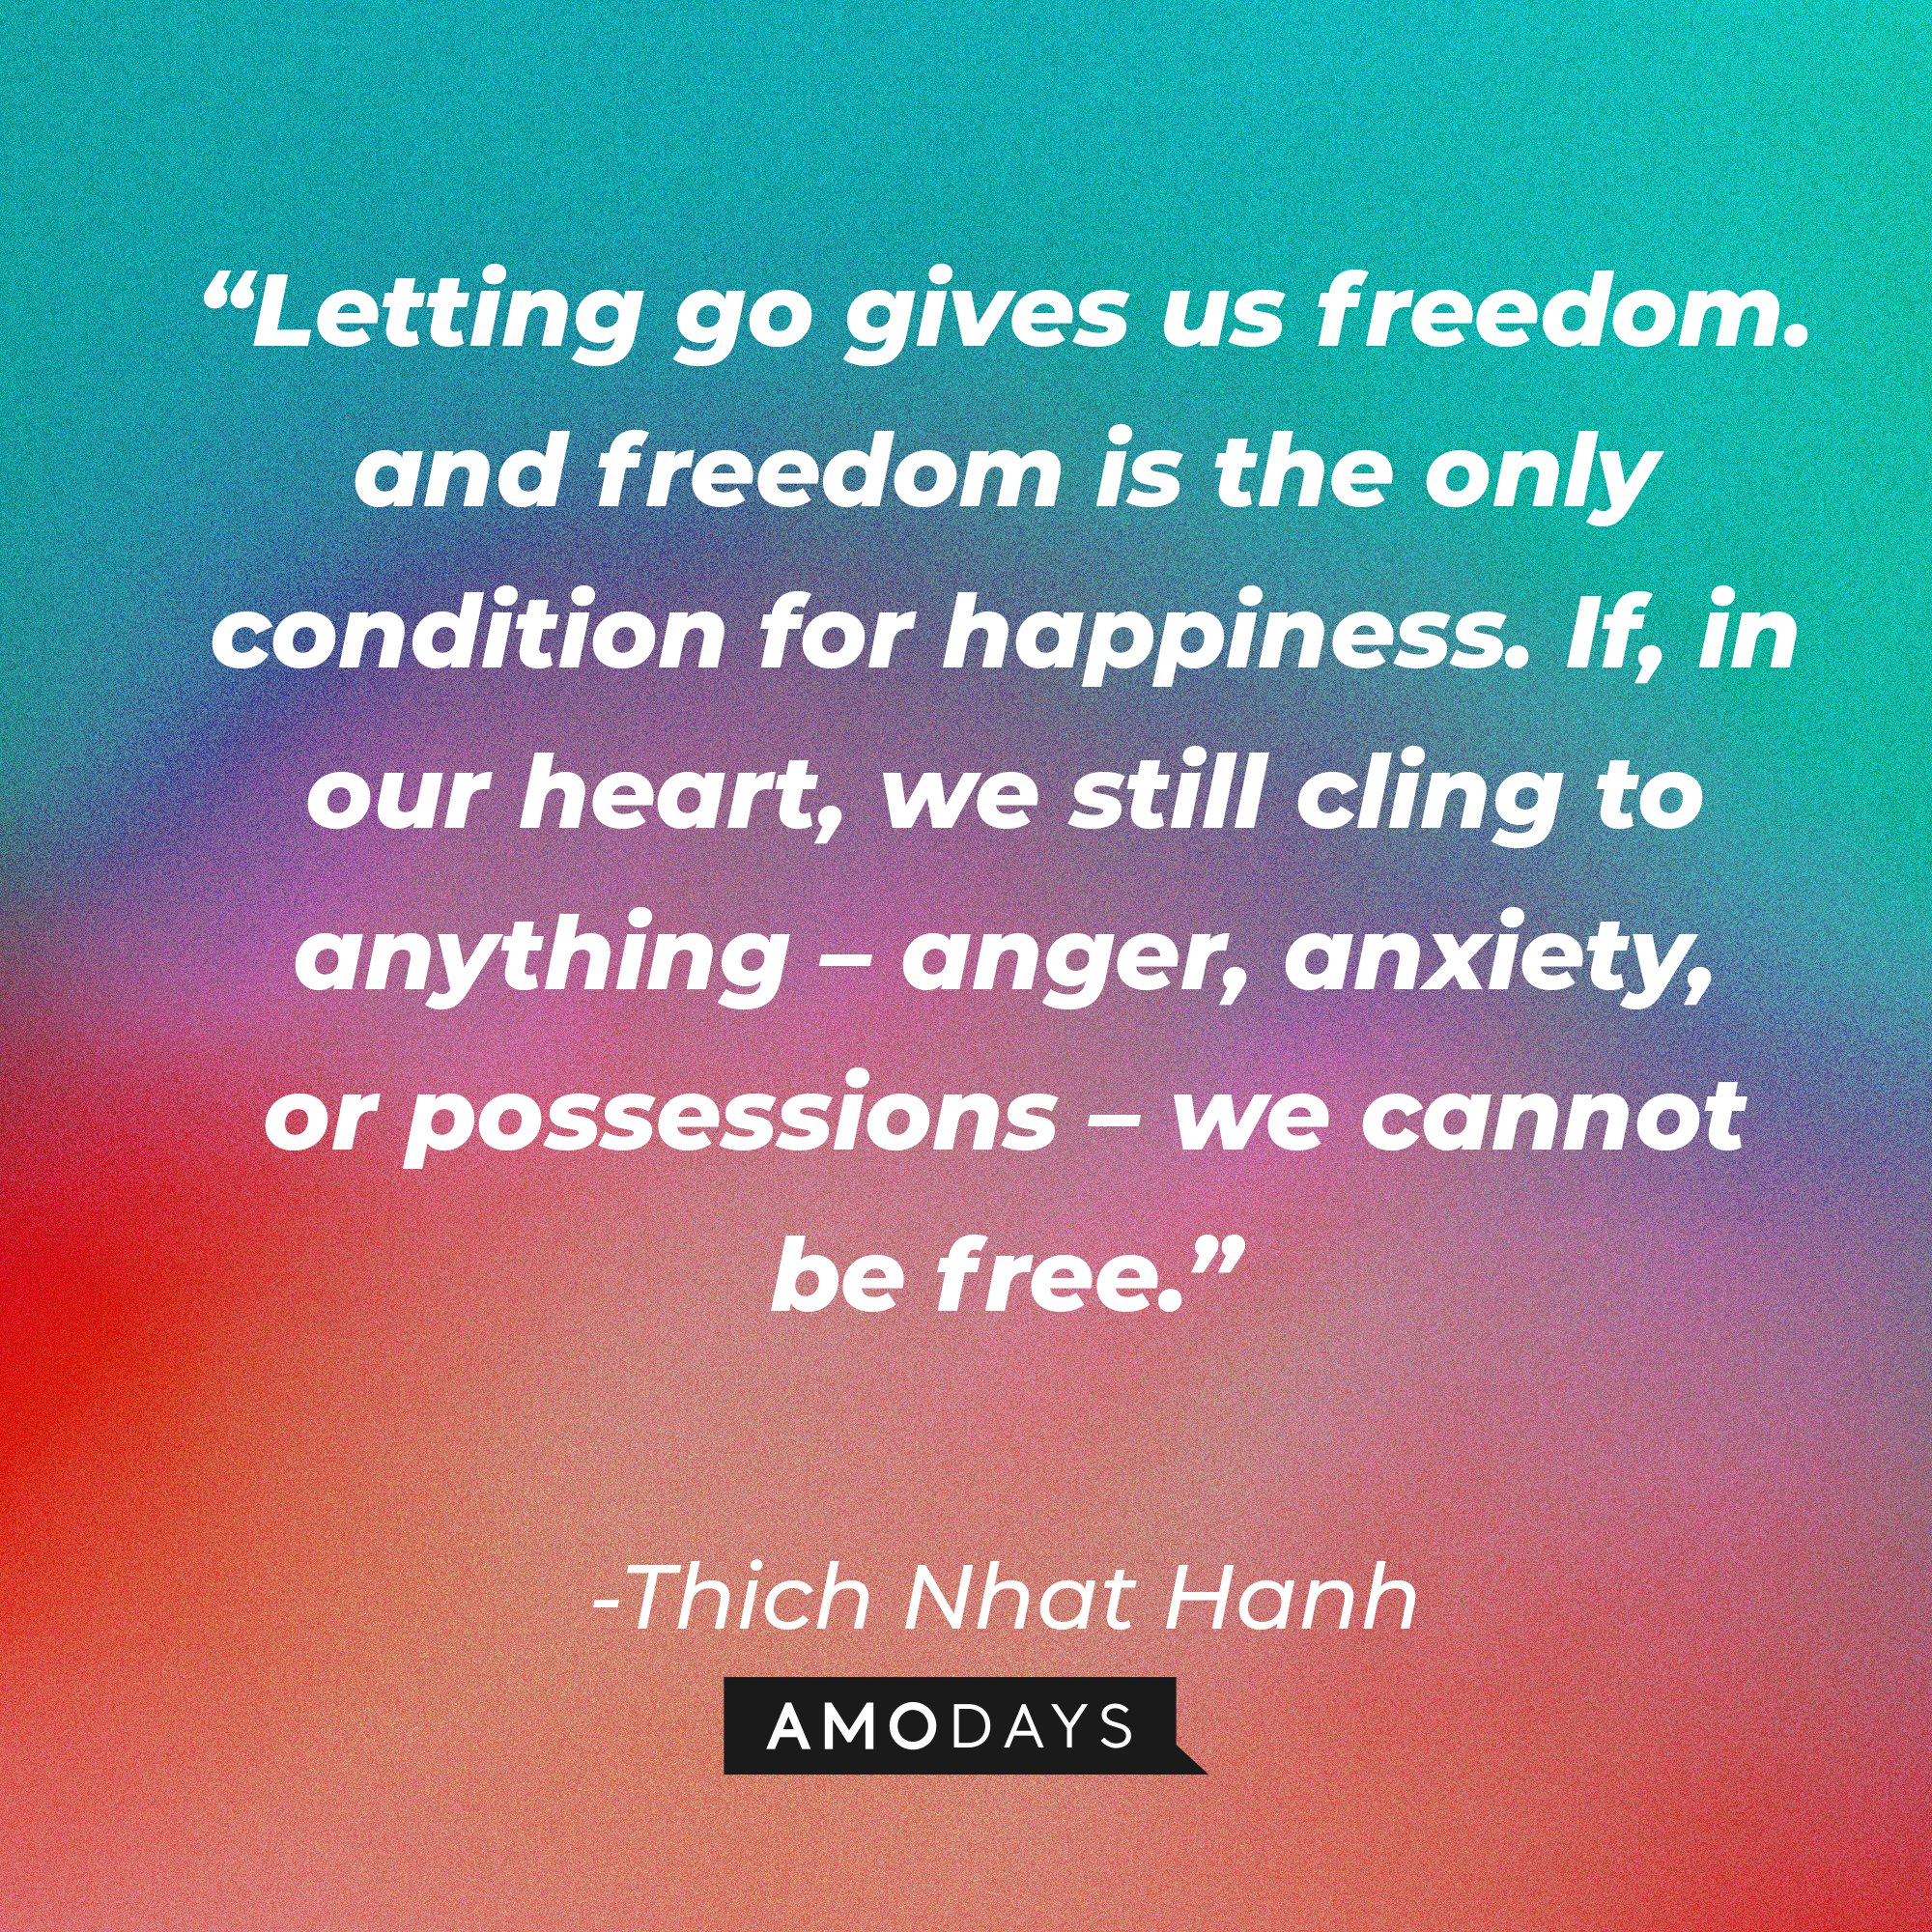 Thich Nhat Hanh's quote: “Letting go gives us freedom. and freedom is the only condition for happiness. If, in our heart, we still cling to anything – anger, anxiety, or possessions – we cannot be free.” | Image: AmoDays